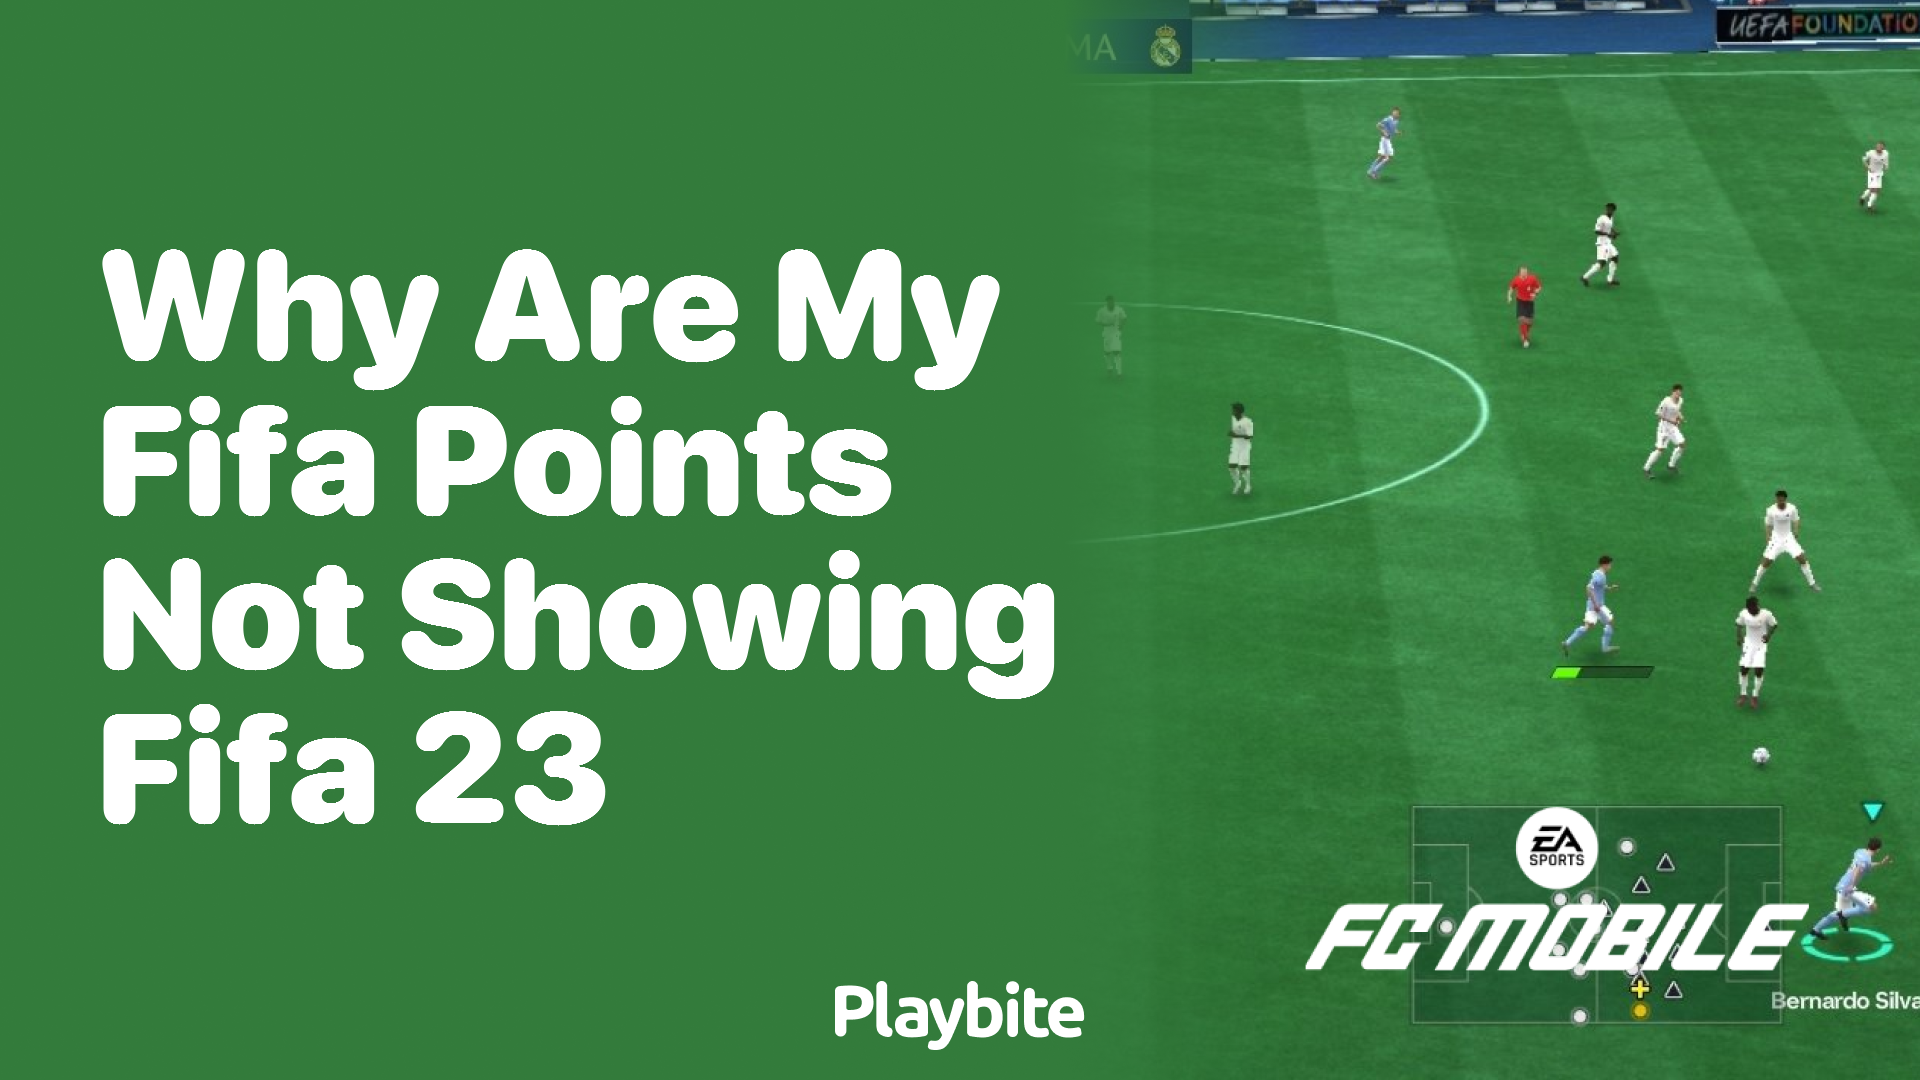 Why Are My FIFA Points Not Showing in FIFA 23?